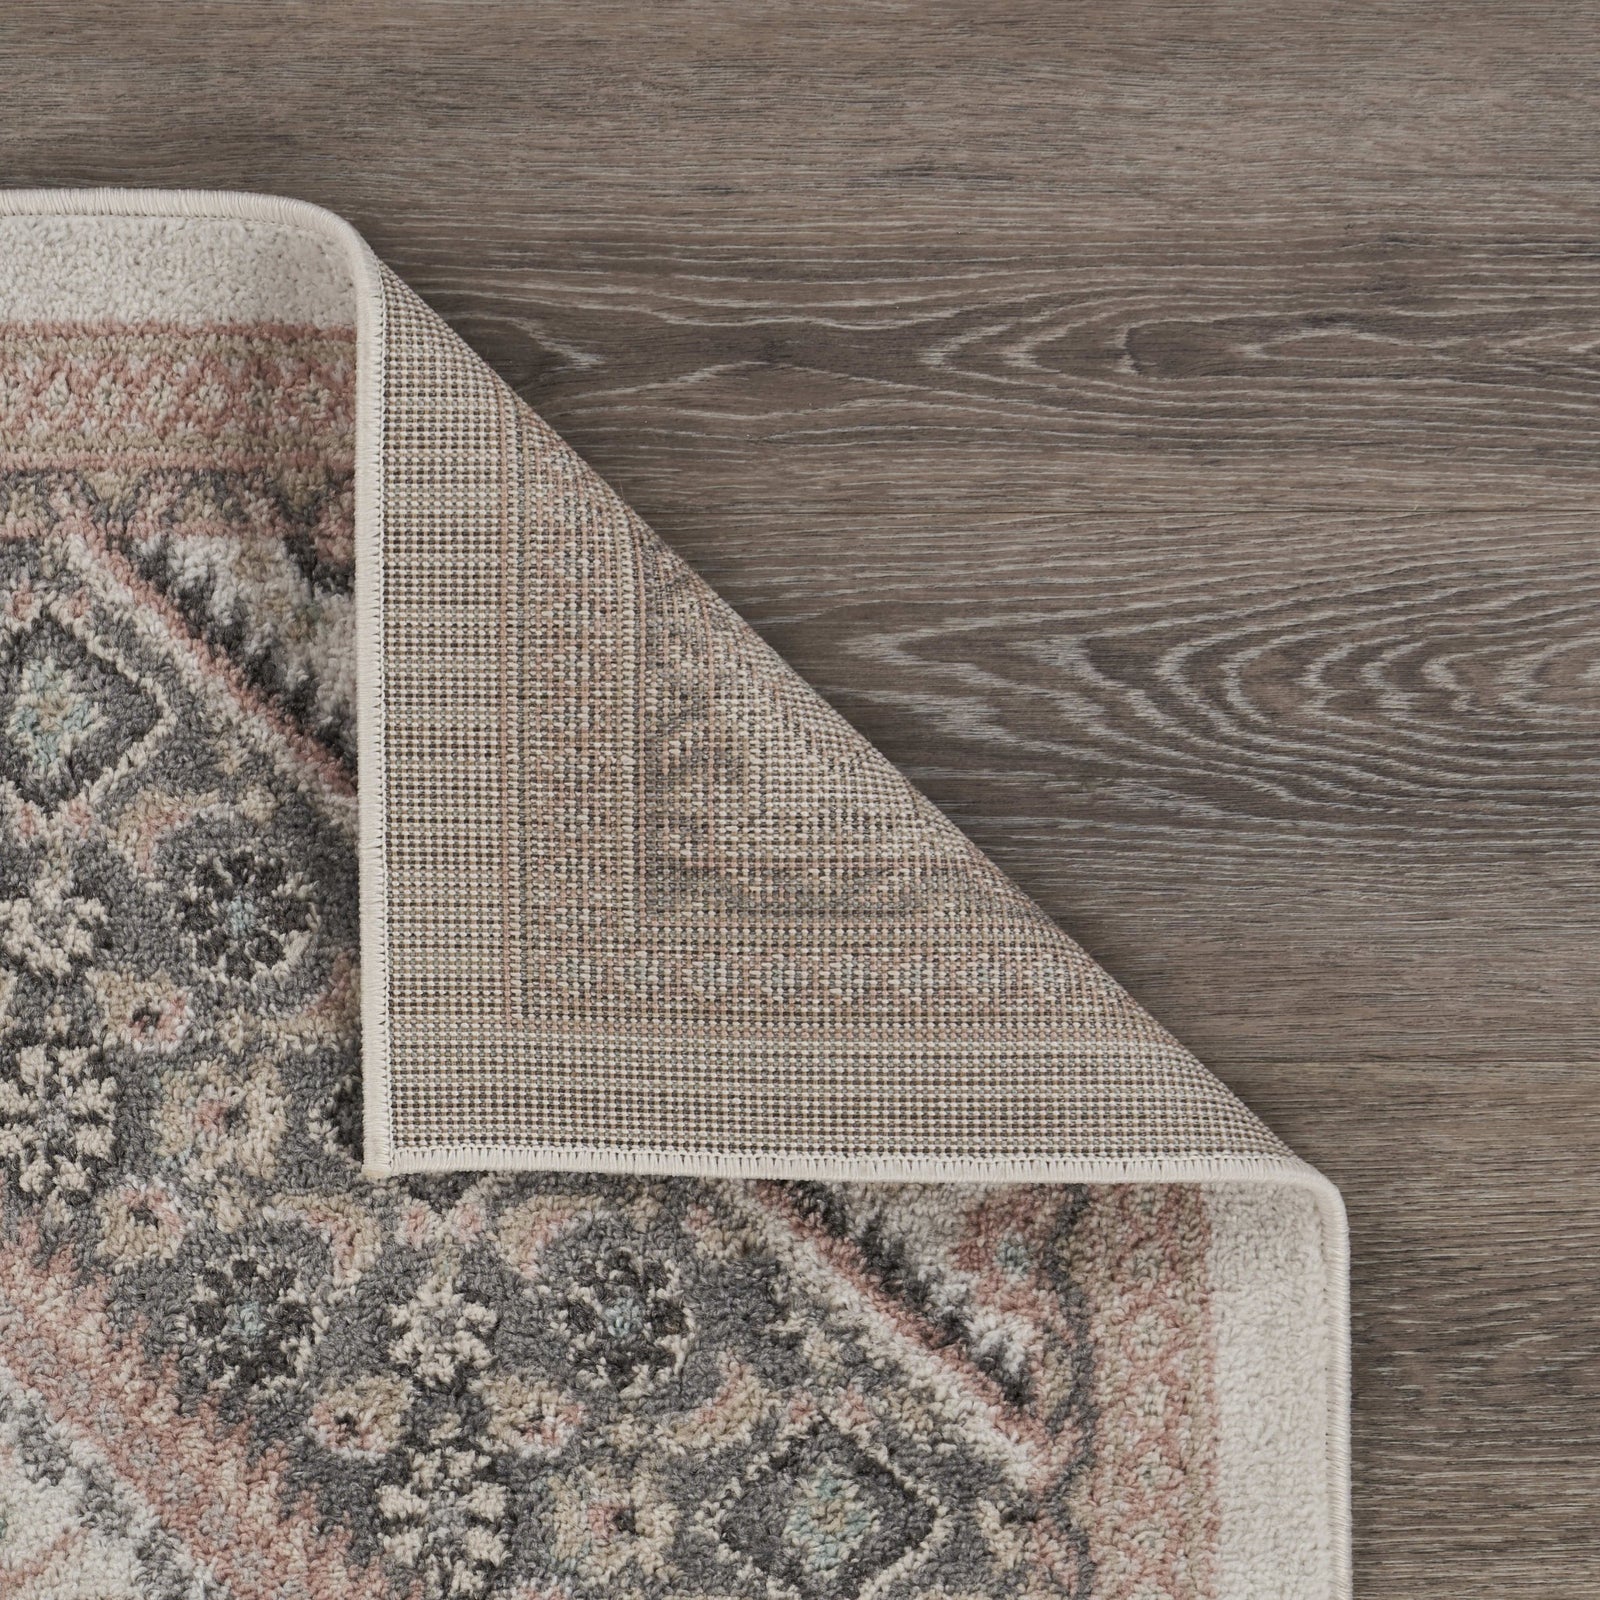 5’ x 7’ Gray and Blush Traditional Area Rug